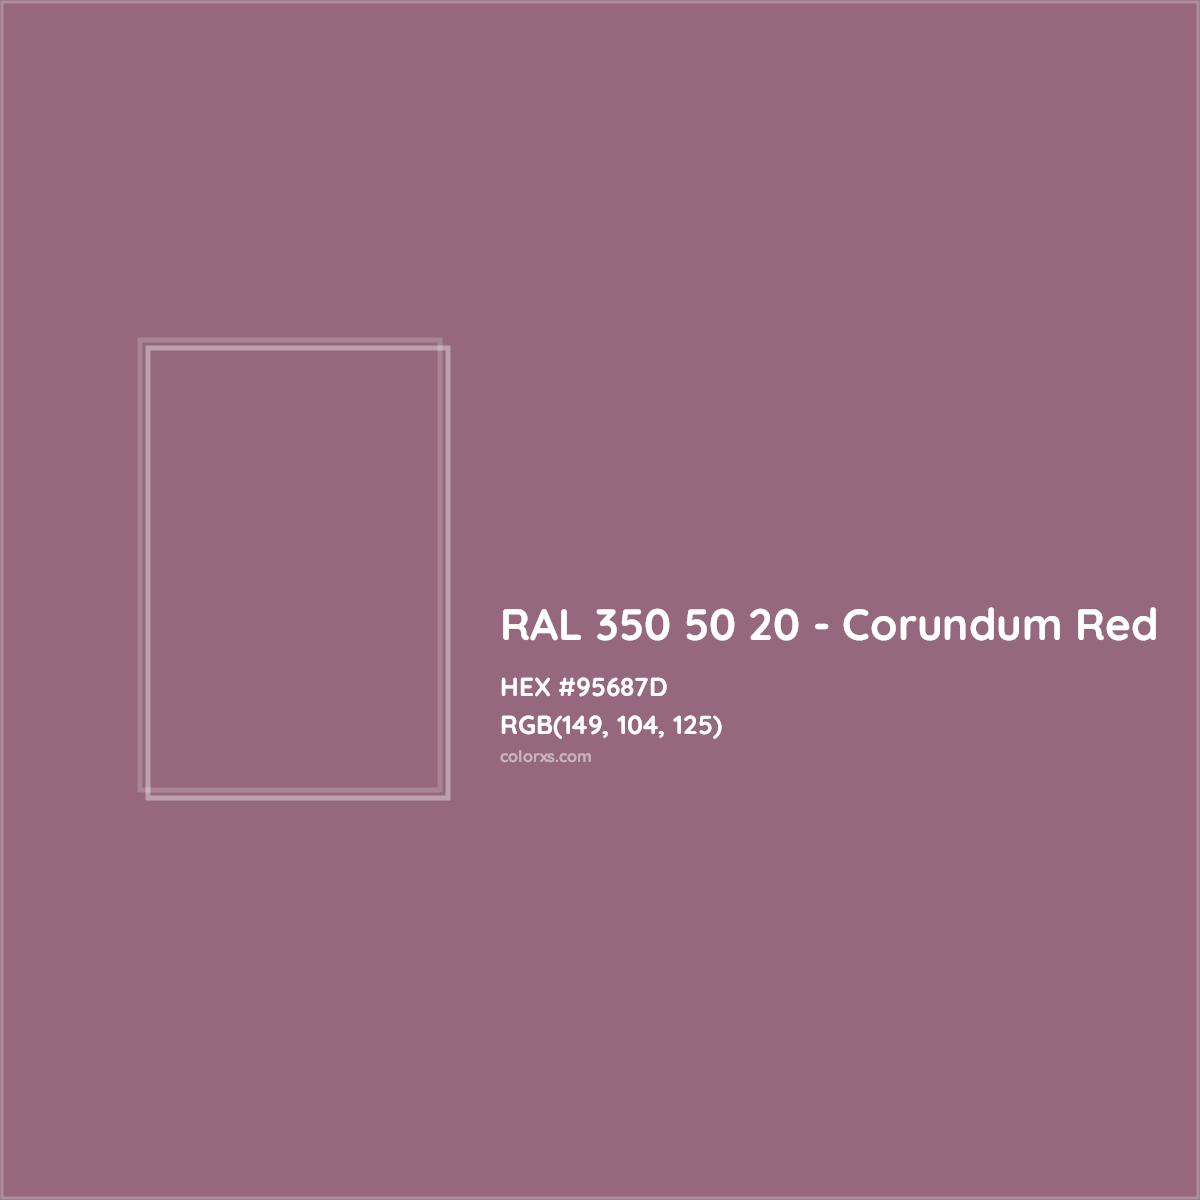 HEX #95687D RAL 350 50 20 - Corundum Red CMS RAL Design - Color Code